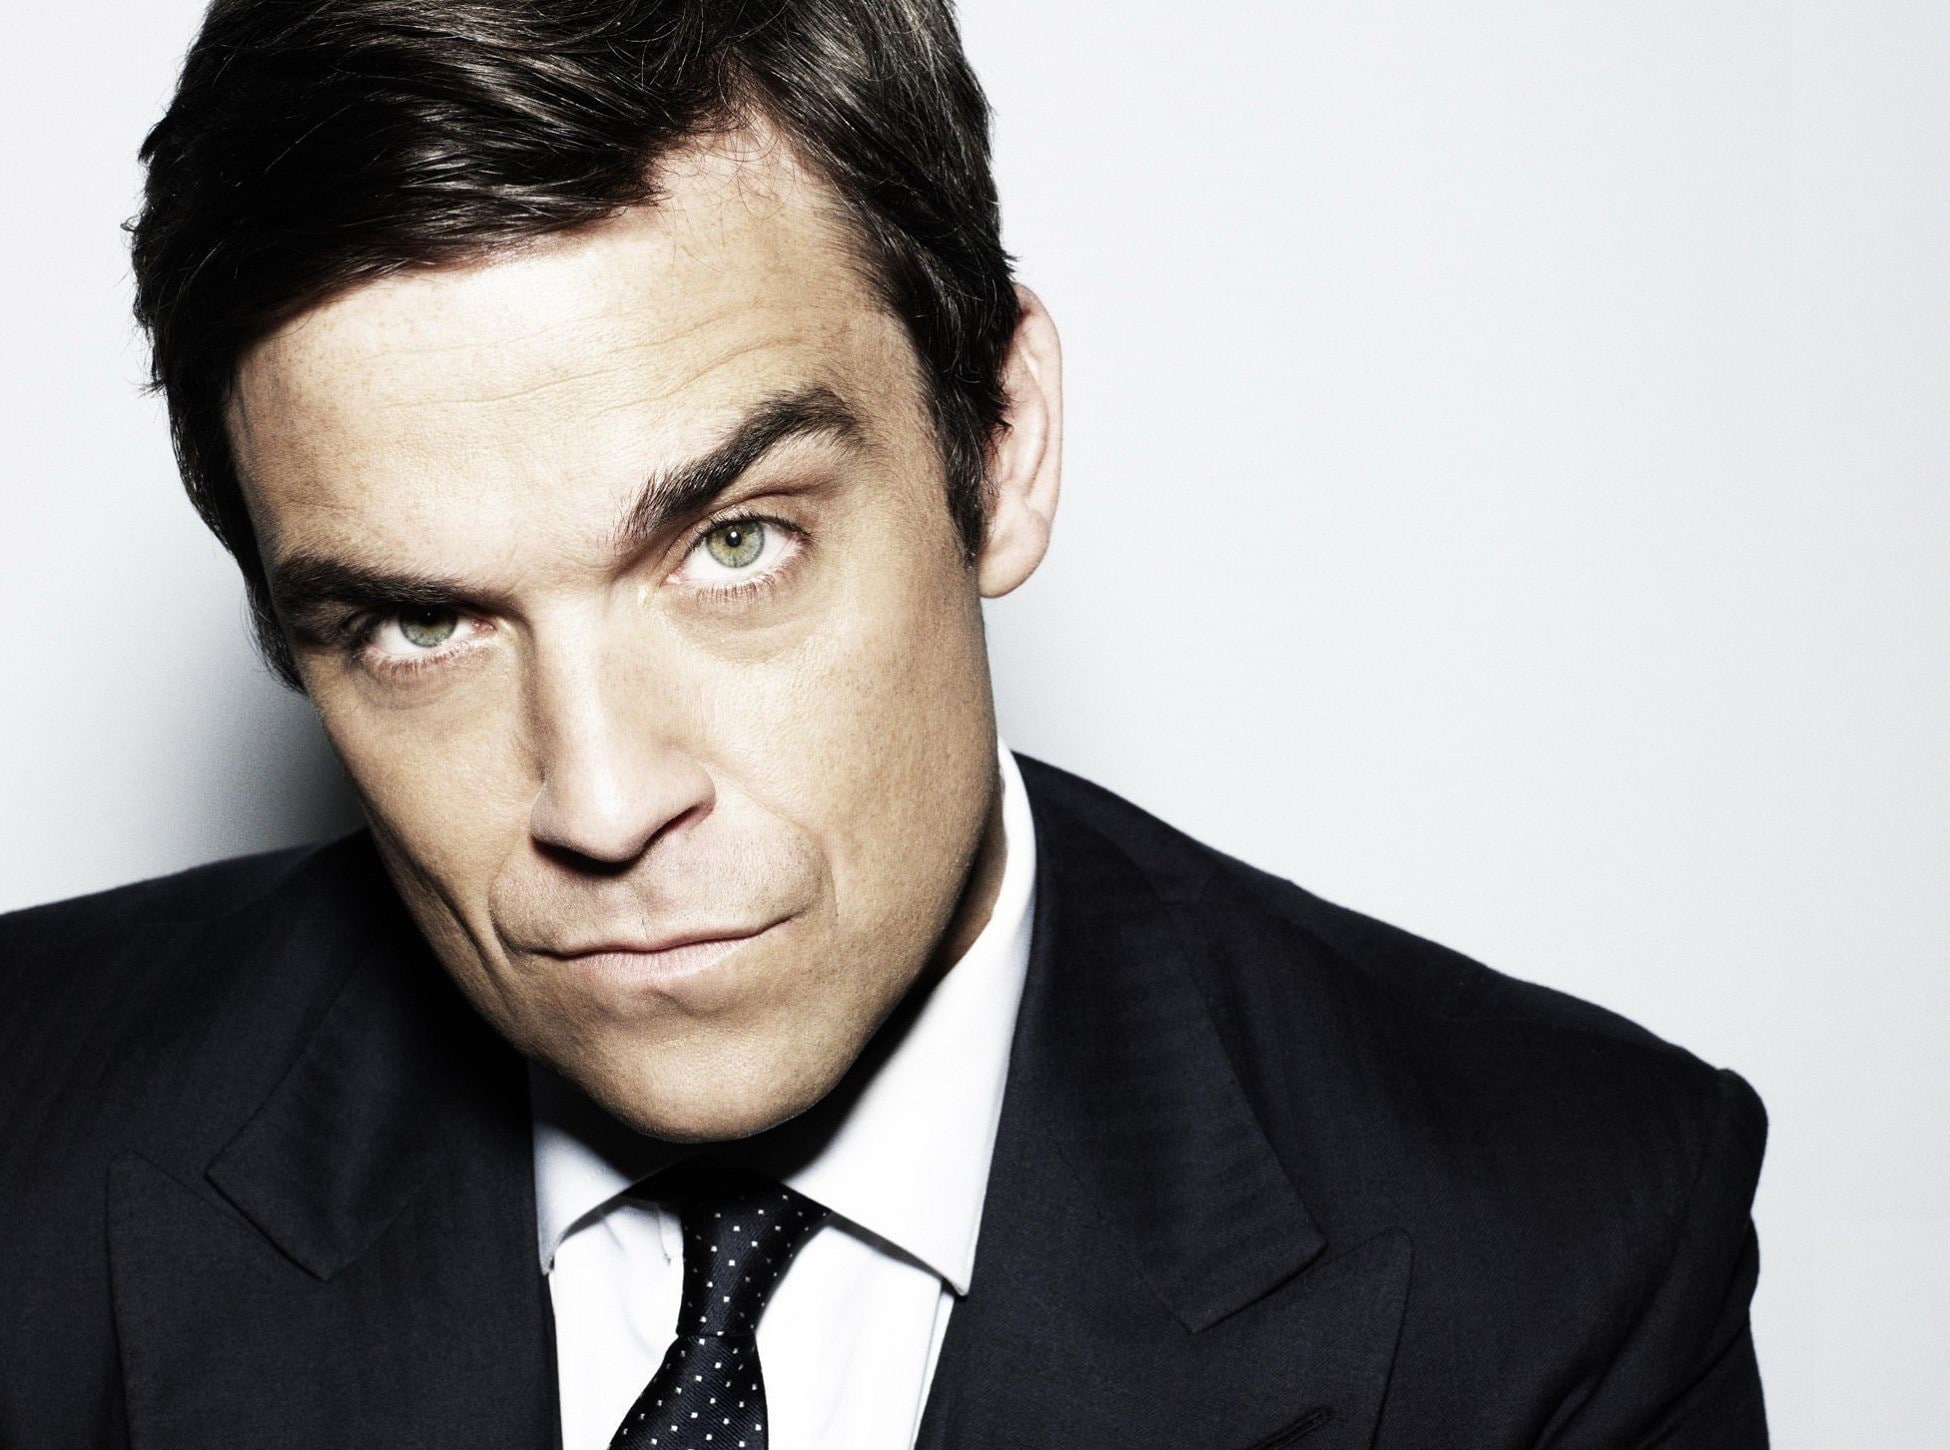 Robbie williams, Person, Emotion, Blue-eyed, businessman, business person